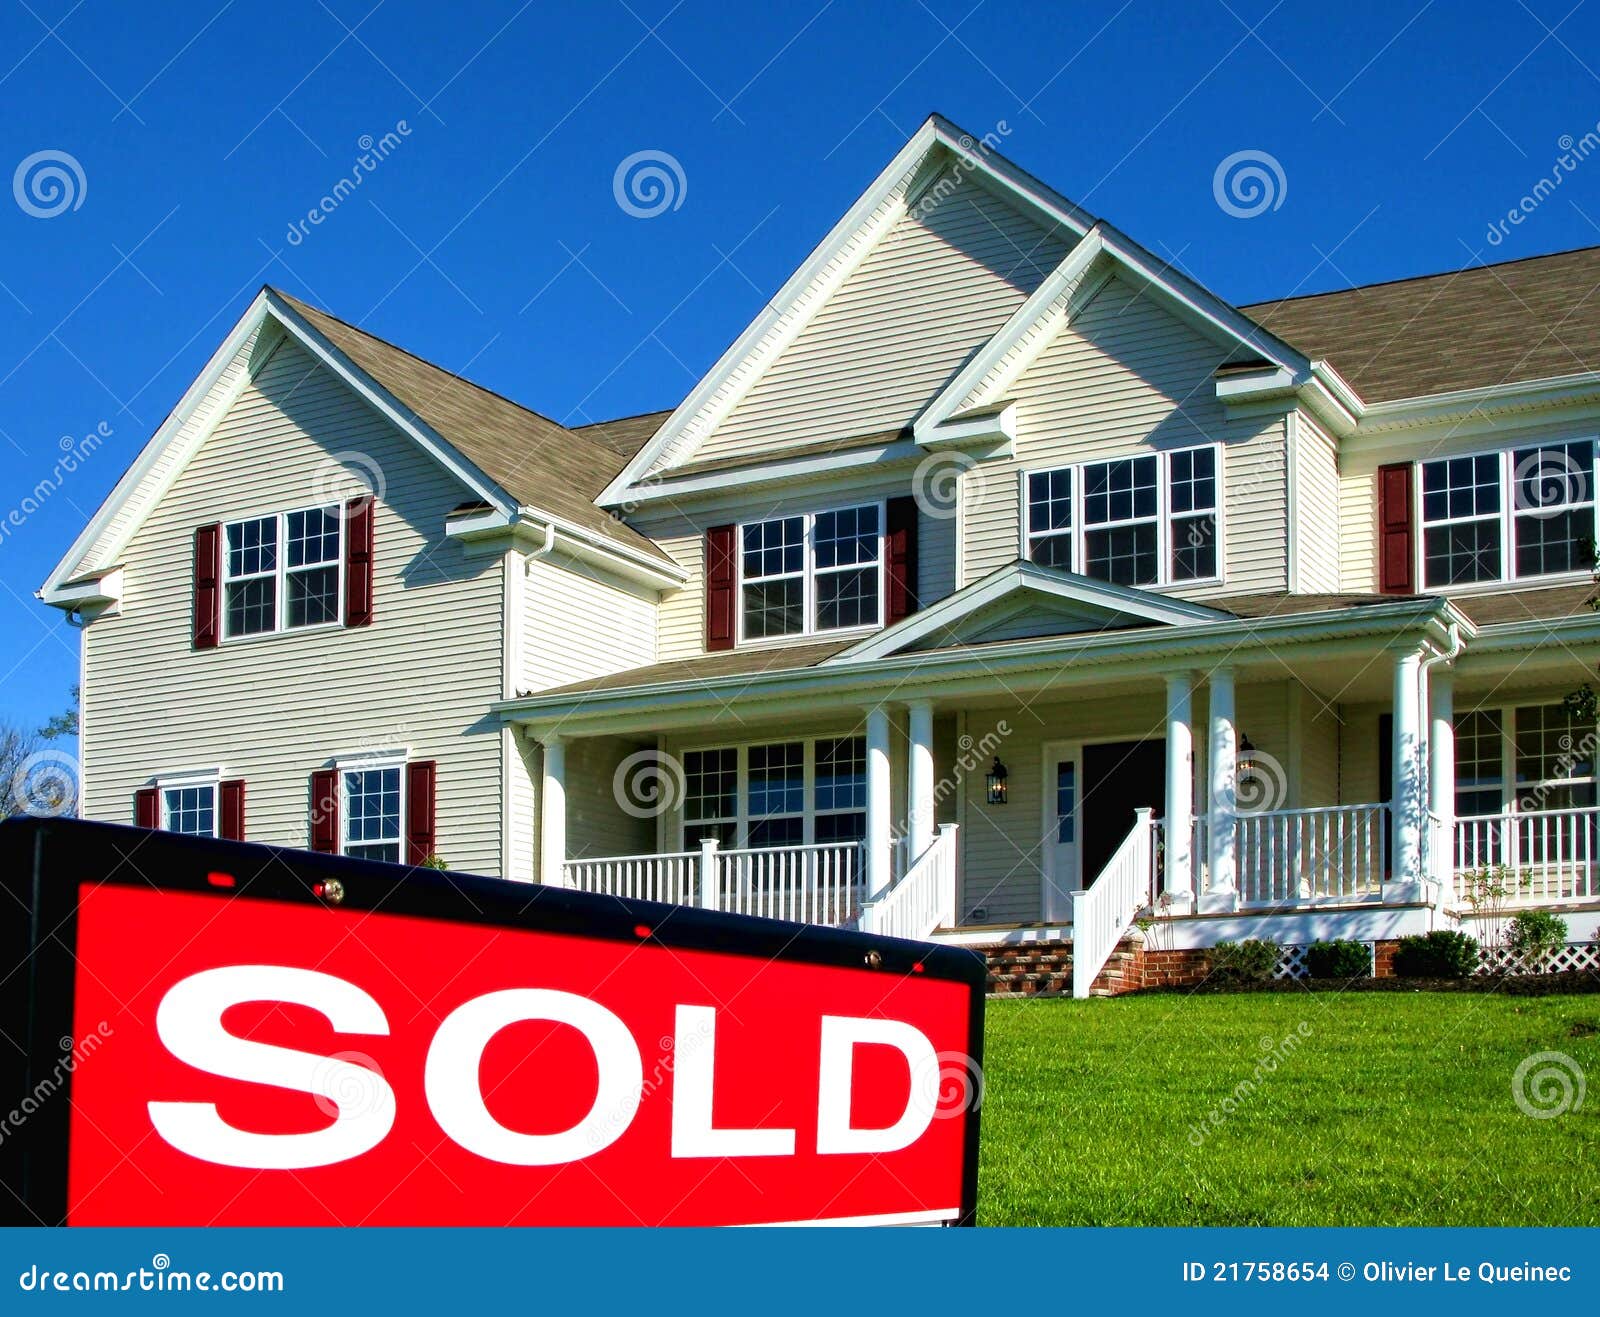 Real Estate Realtor Sold Sign And House For Sale Stock Images  Image 